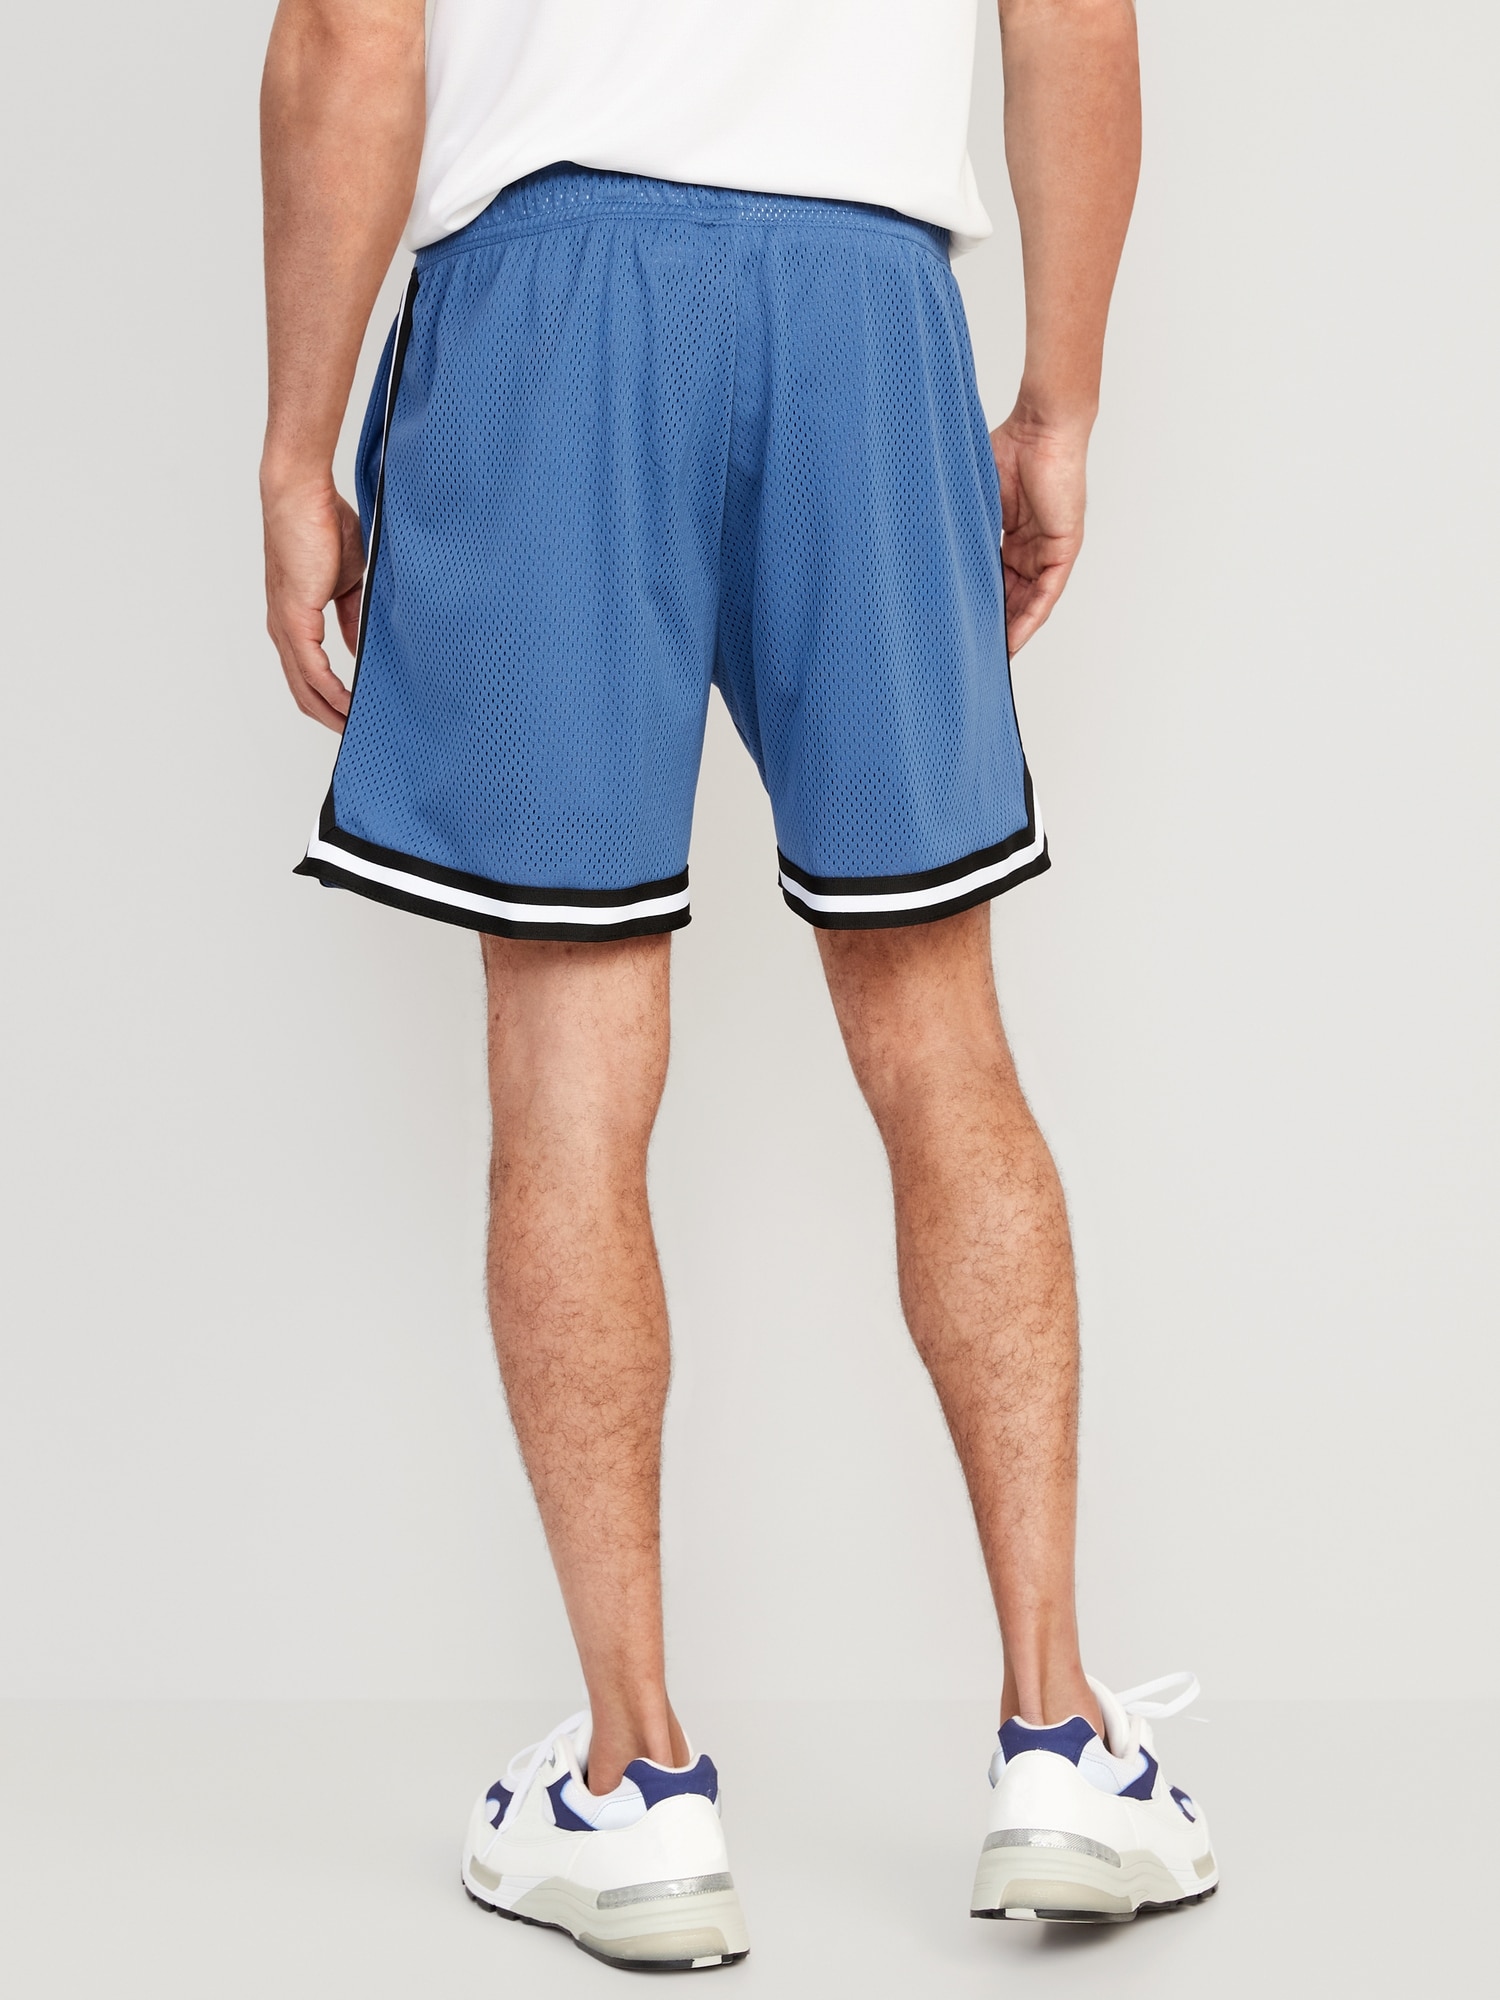 Basketball Shorts Mens,fans Workout Gym Athletic Casual Shorts,men Retro  Mesh Embroidered With Pockets